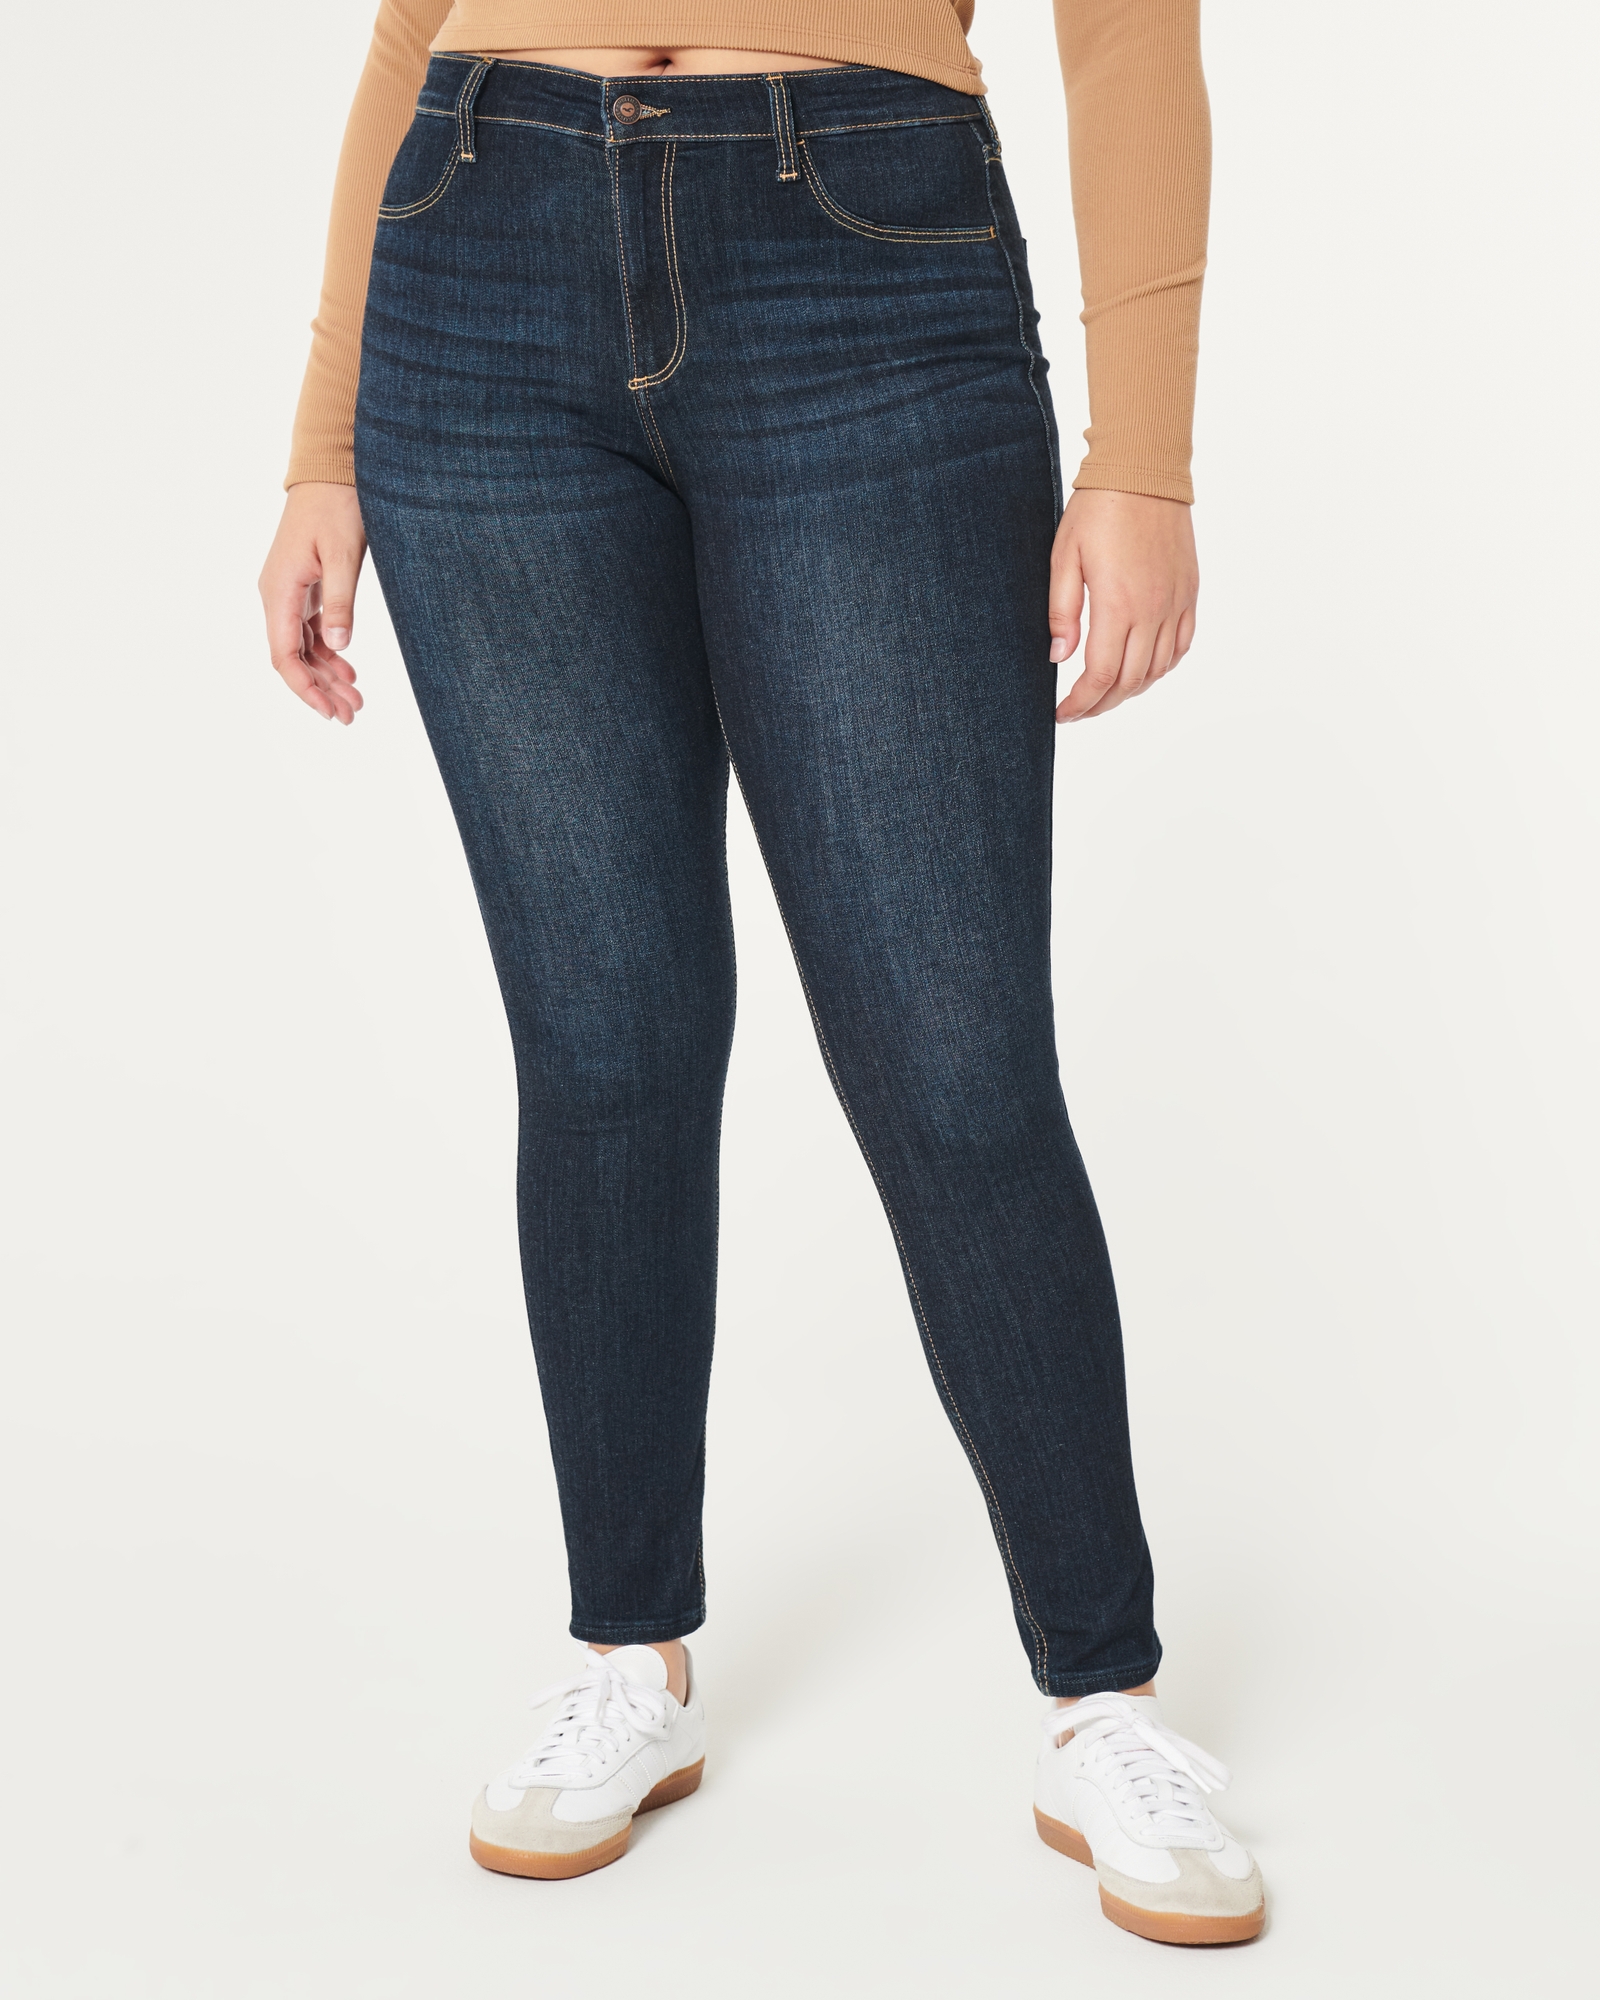 Hollister Ripped Curvy Ultra High Rise Jean Jeggings Women 5R